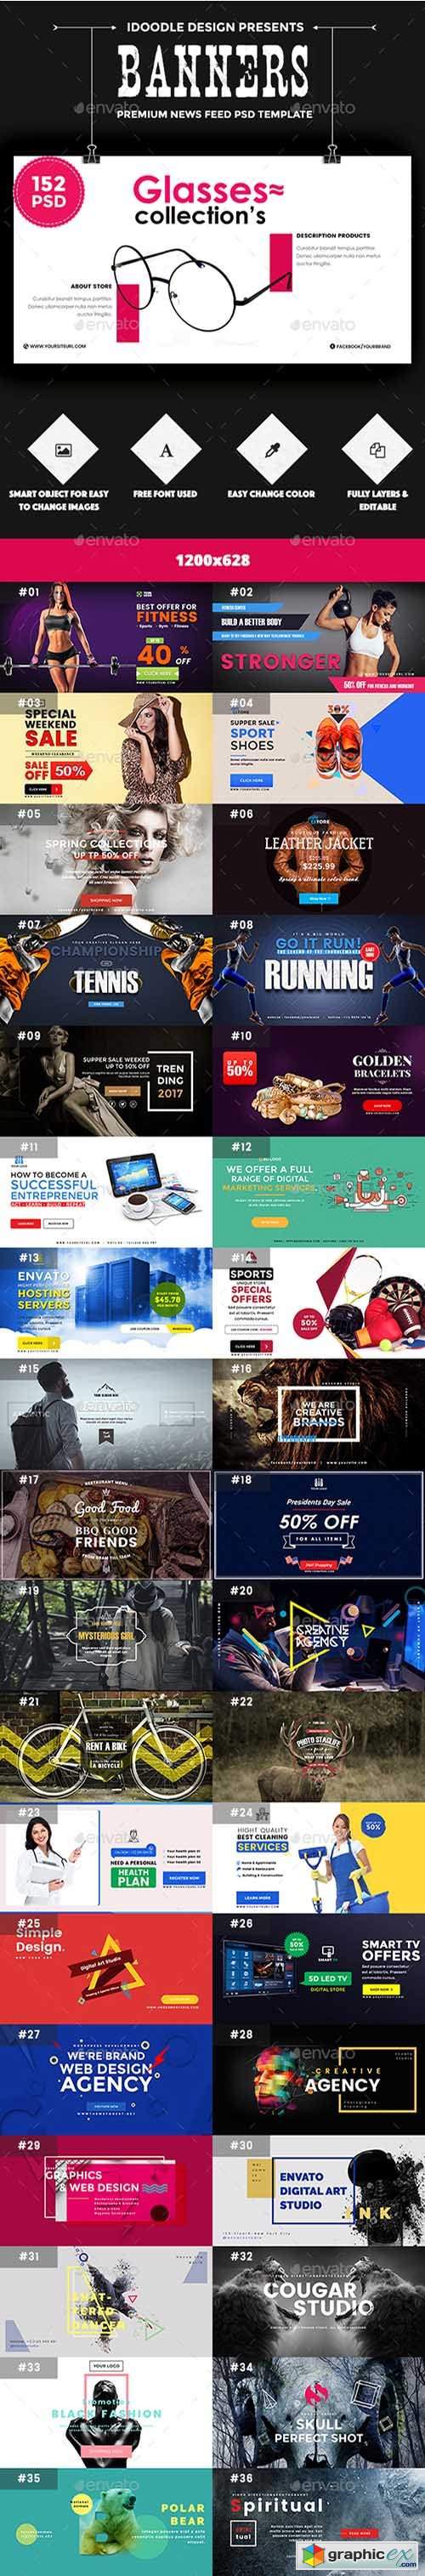 Promotion NewsFeed Ads - 152 PSD [02 Size Each]